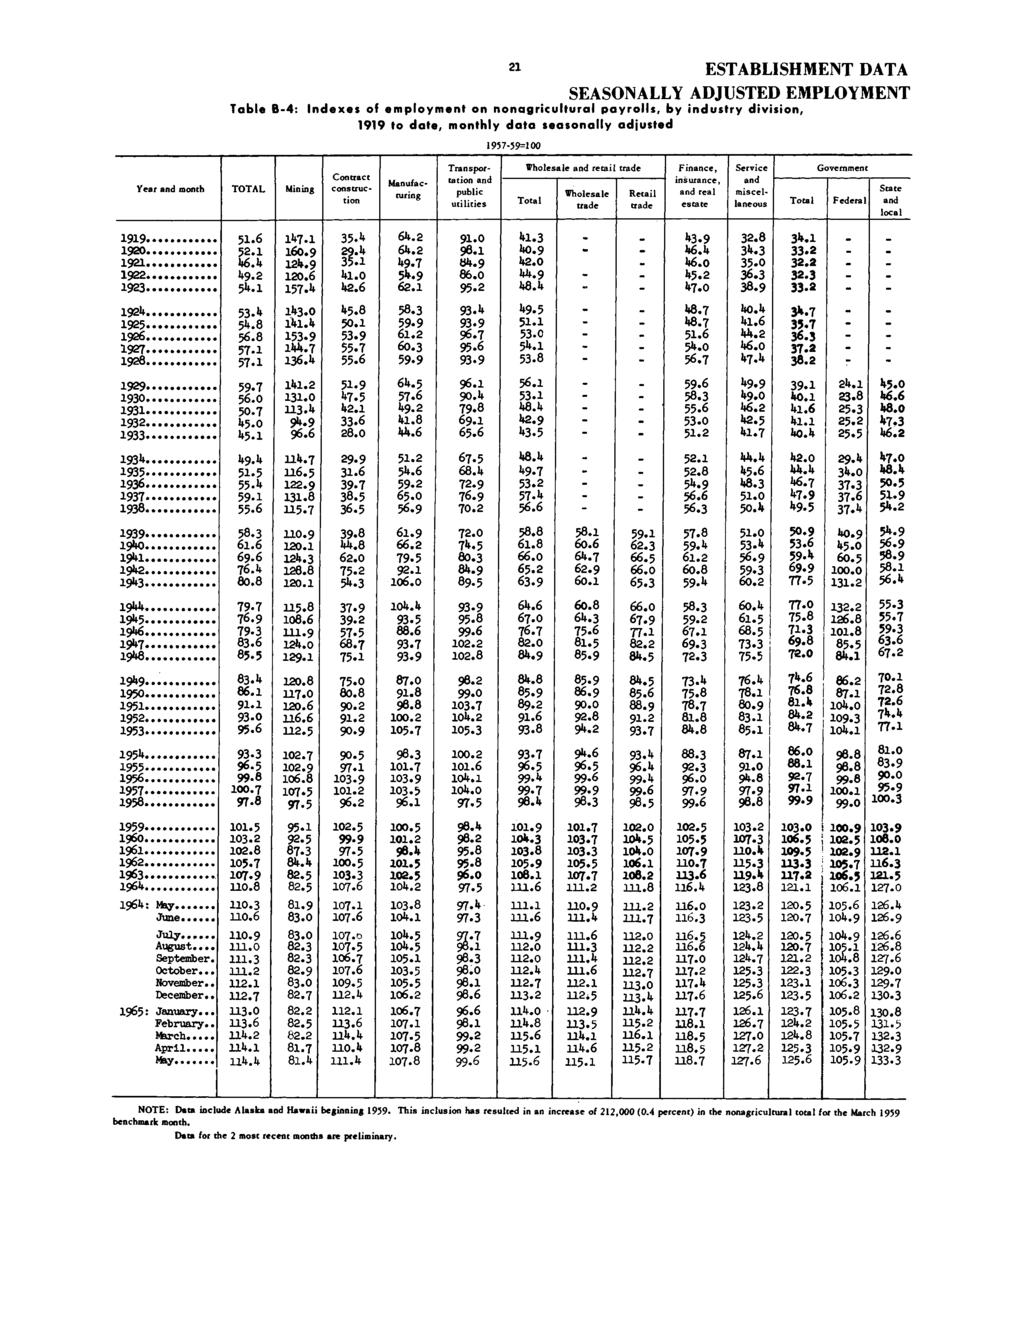 21 ESTABLISHMENT DATA SEASONALLY ADJUSTED EMPLOYMENT Table B-4: Indexes of employment on nonagricultural payrolls, by industry division, 1919 to date, monthly data seasonally adjusted 1957-59=100